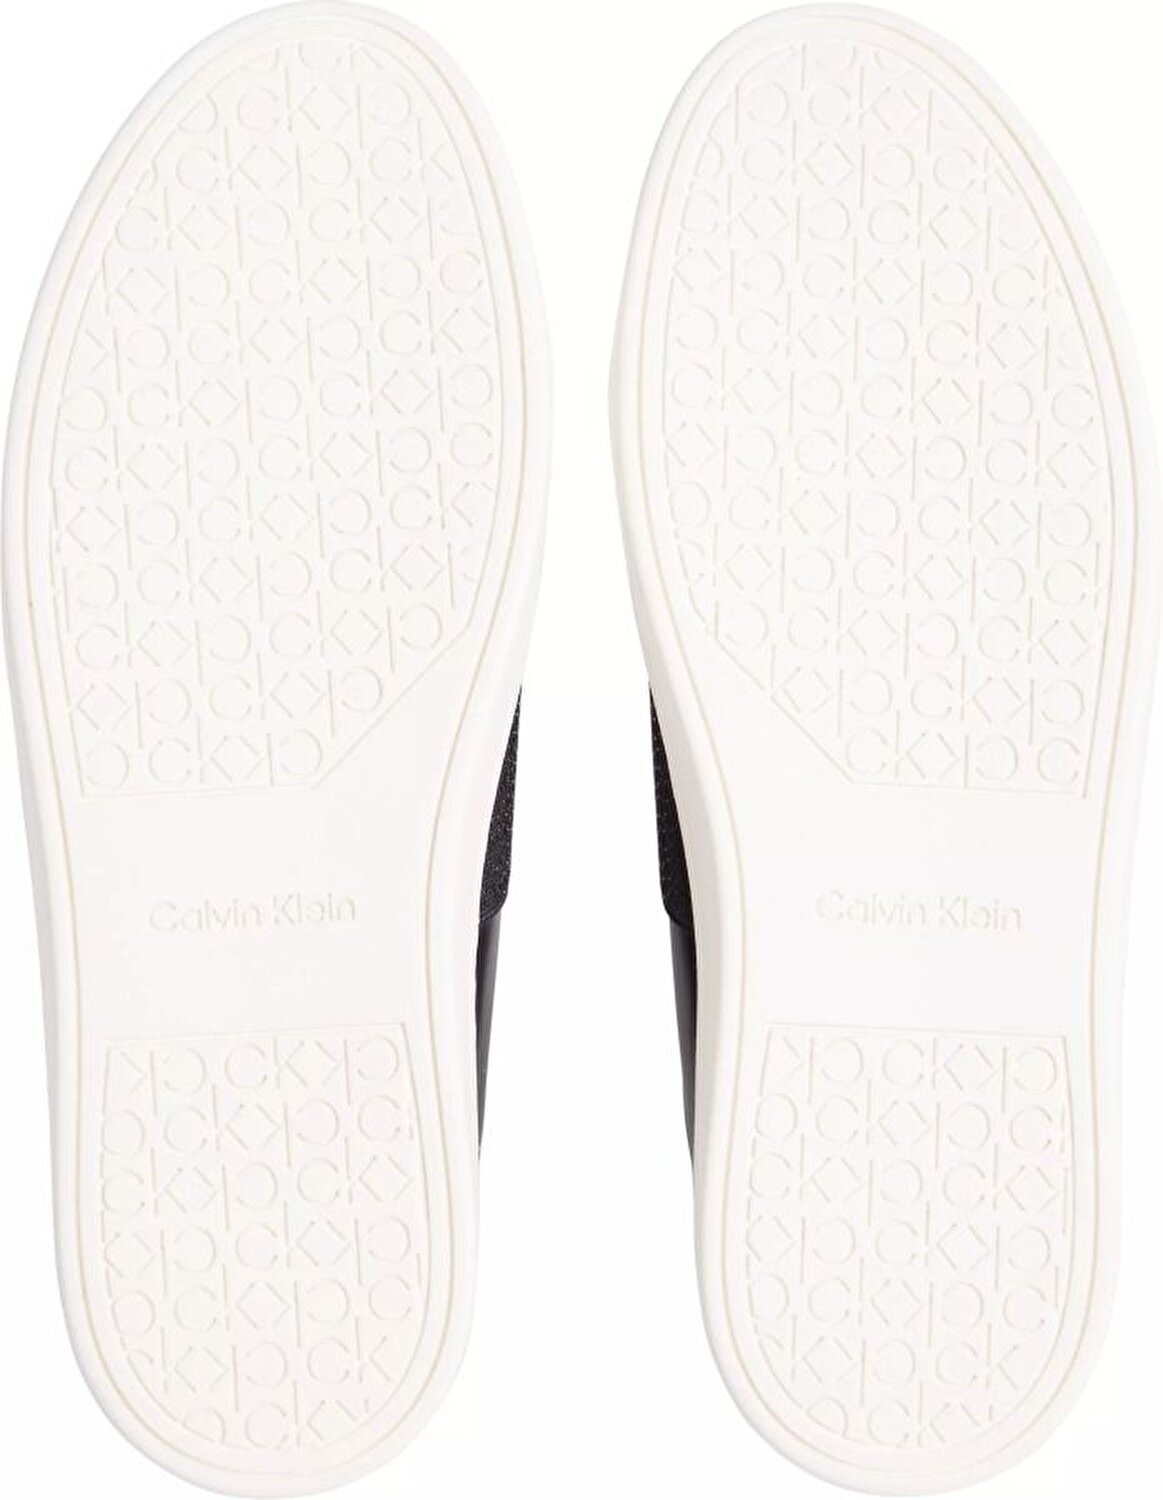 CLEAN CUPSOLE SLIP ON